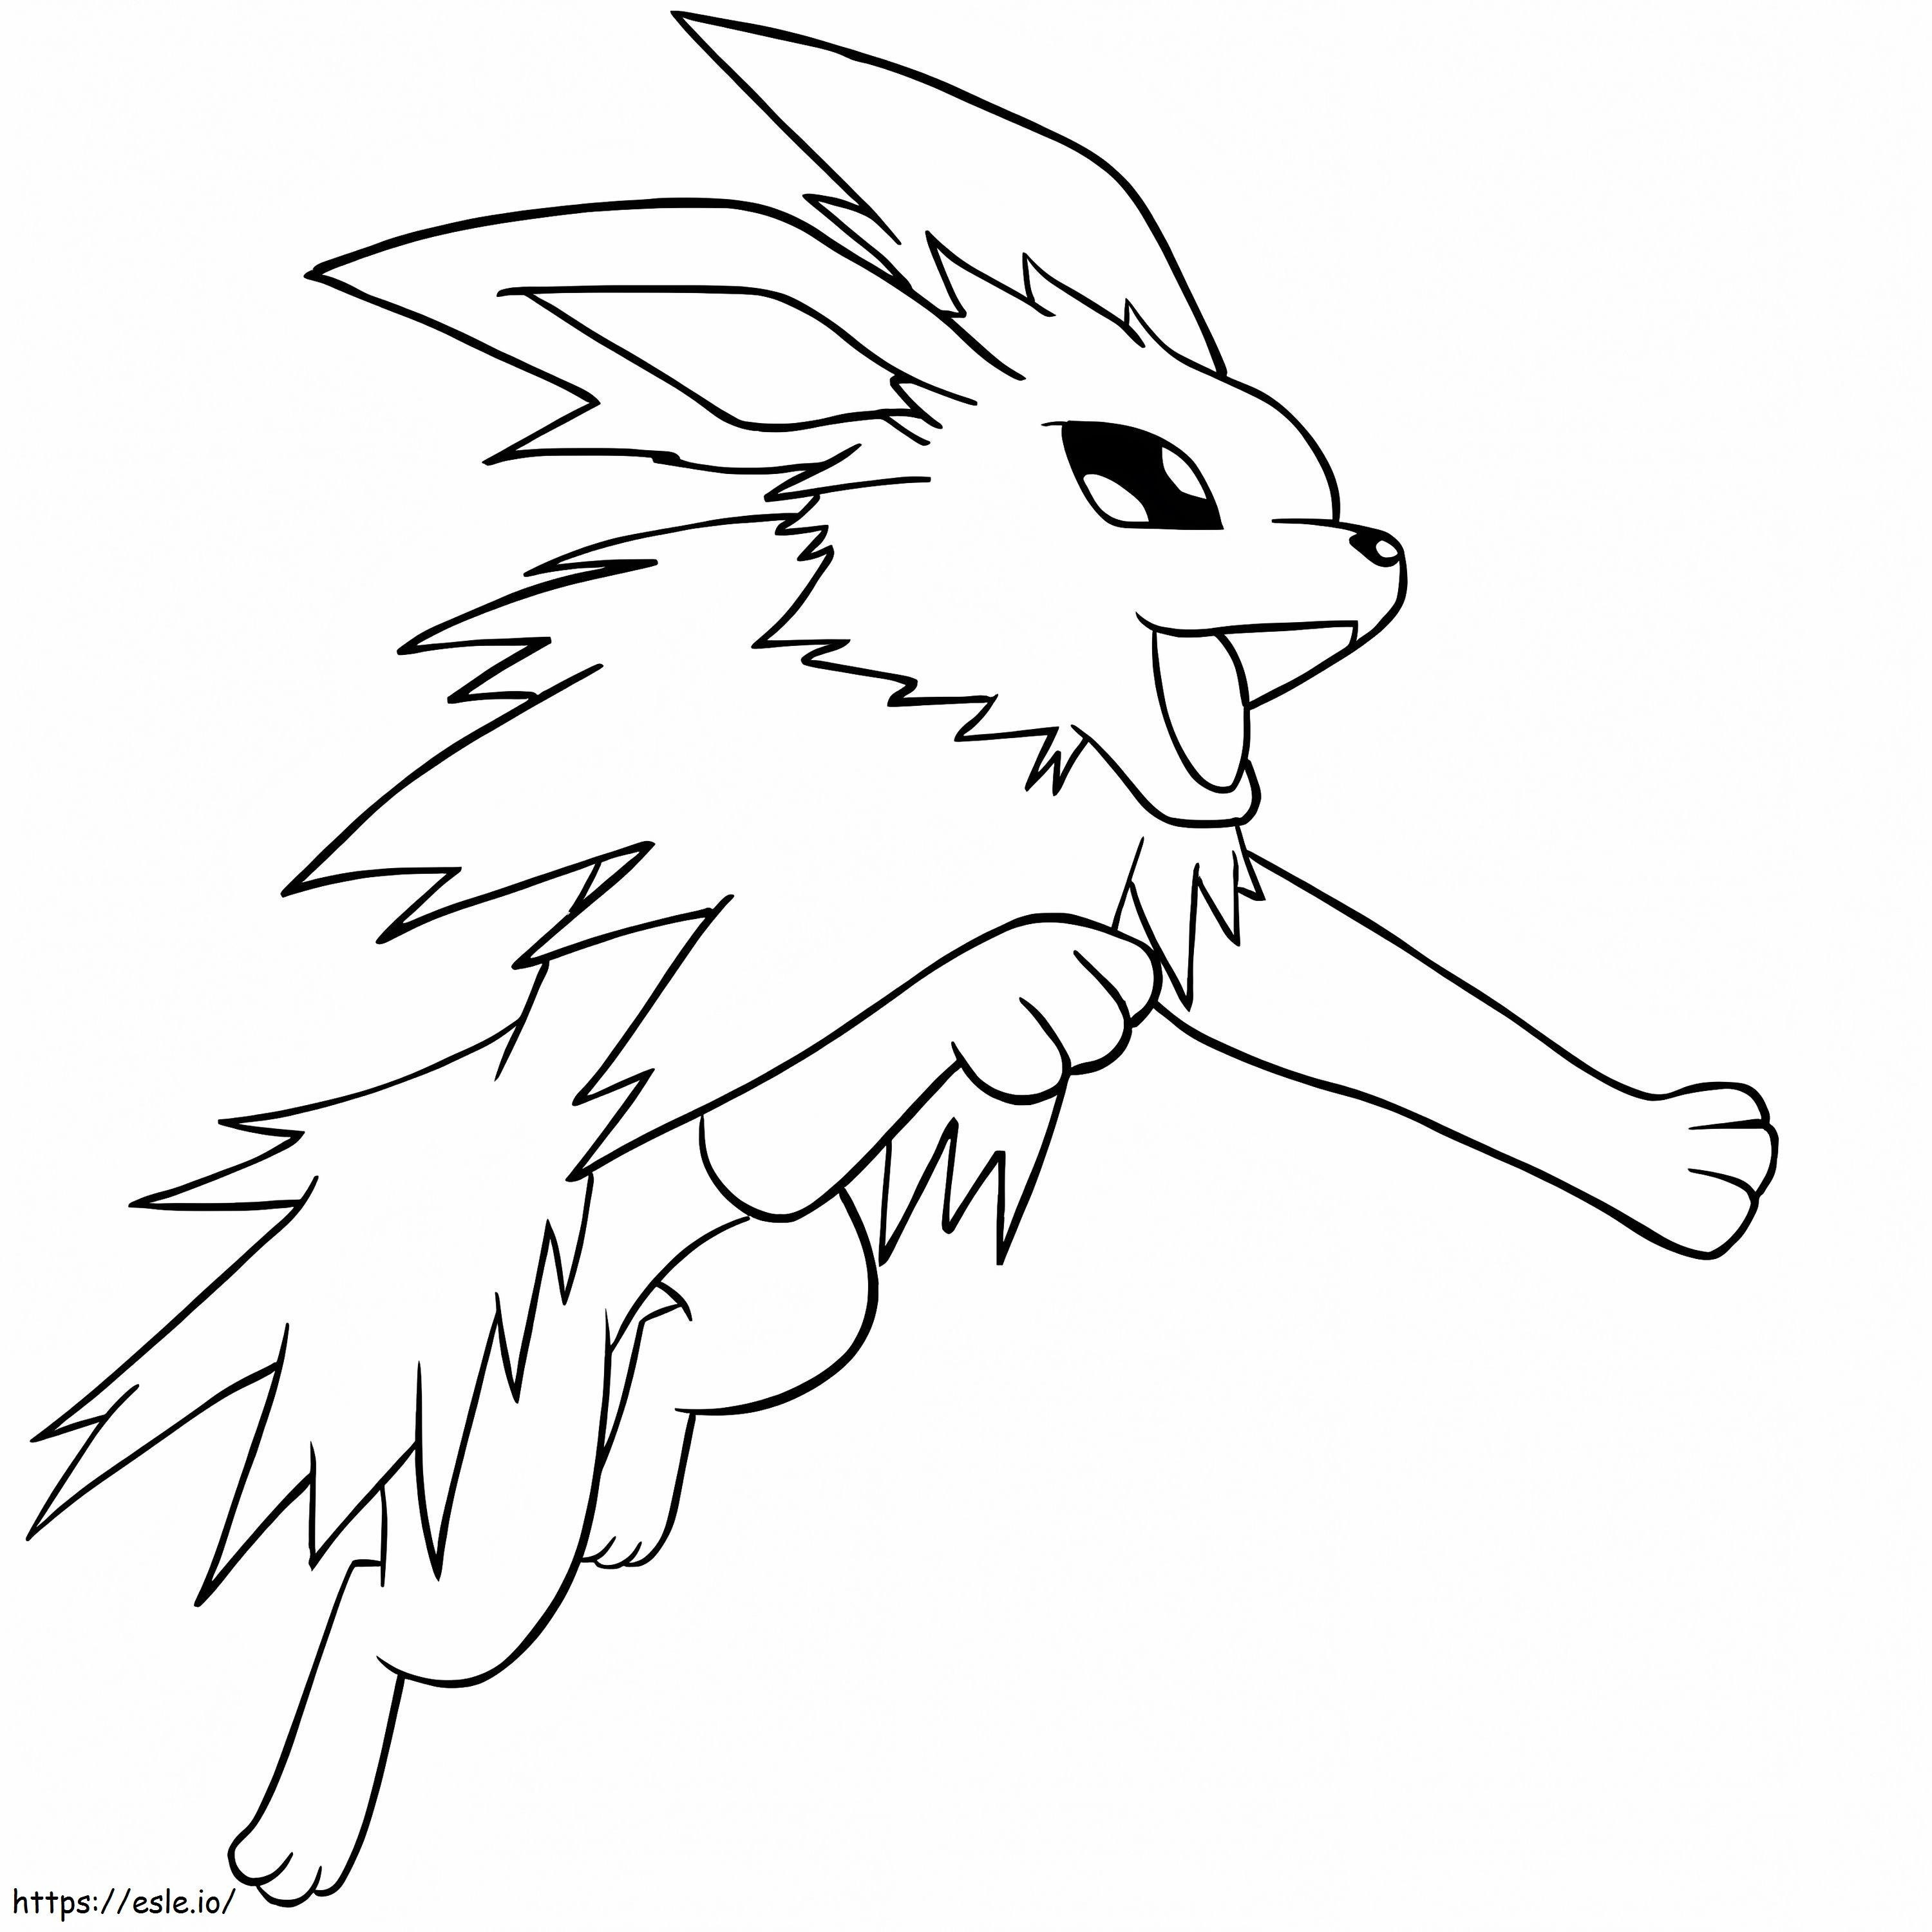 Jolteon 6 coloring page